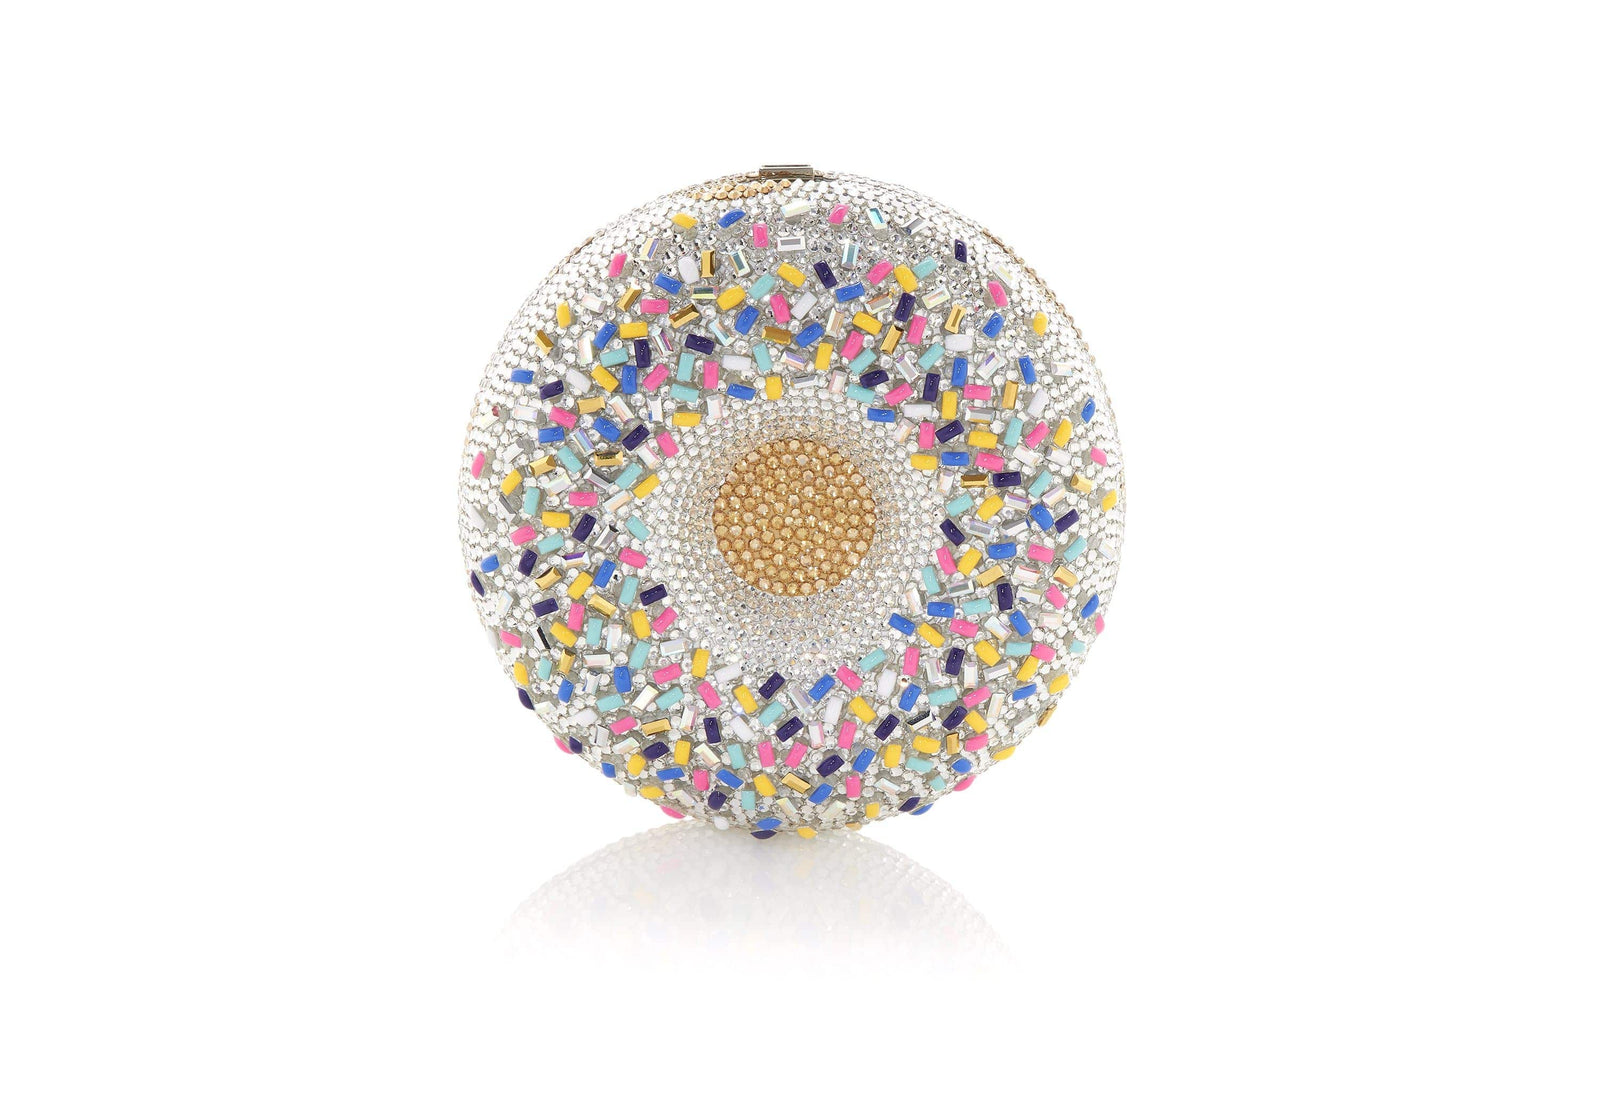 Judith Leiber Couture Khloé's Pot of Gold Crystal Minaudière in Champagne Aurum Multi